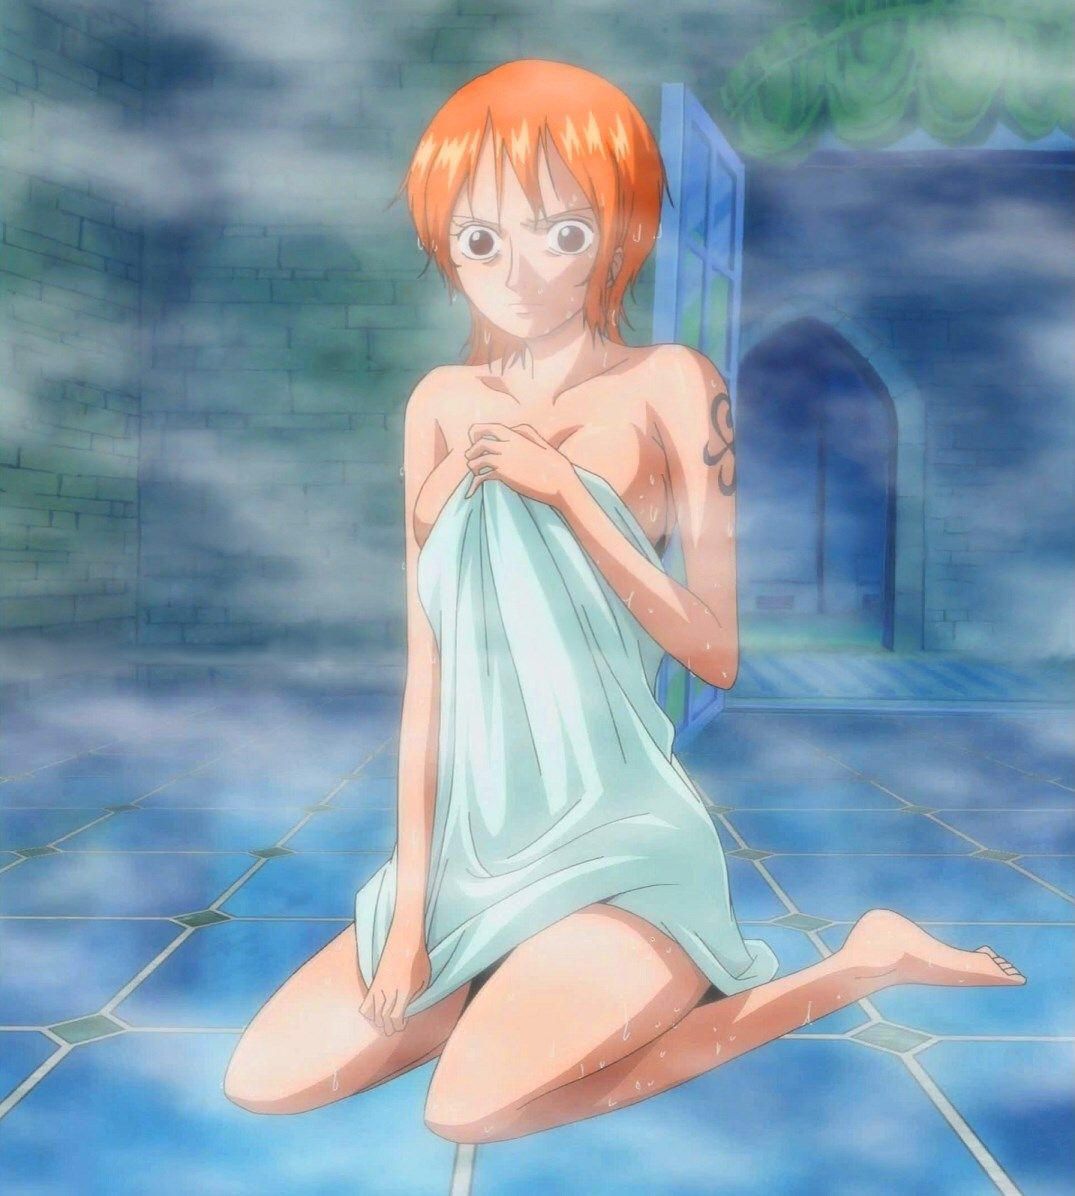 [Image] Wwwwwwww of the early Nami of one piece is too erotic 7